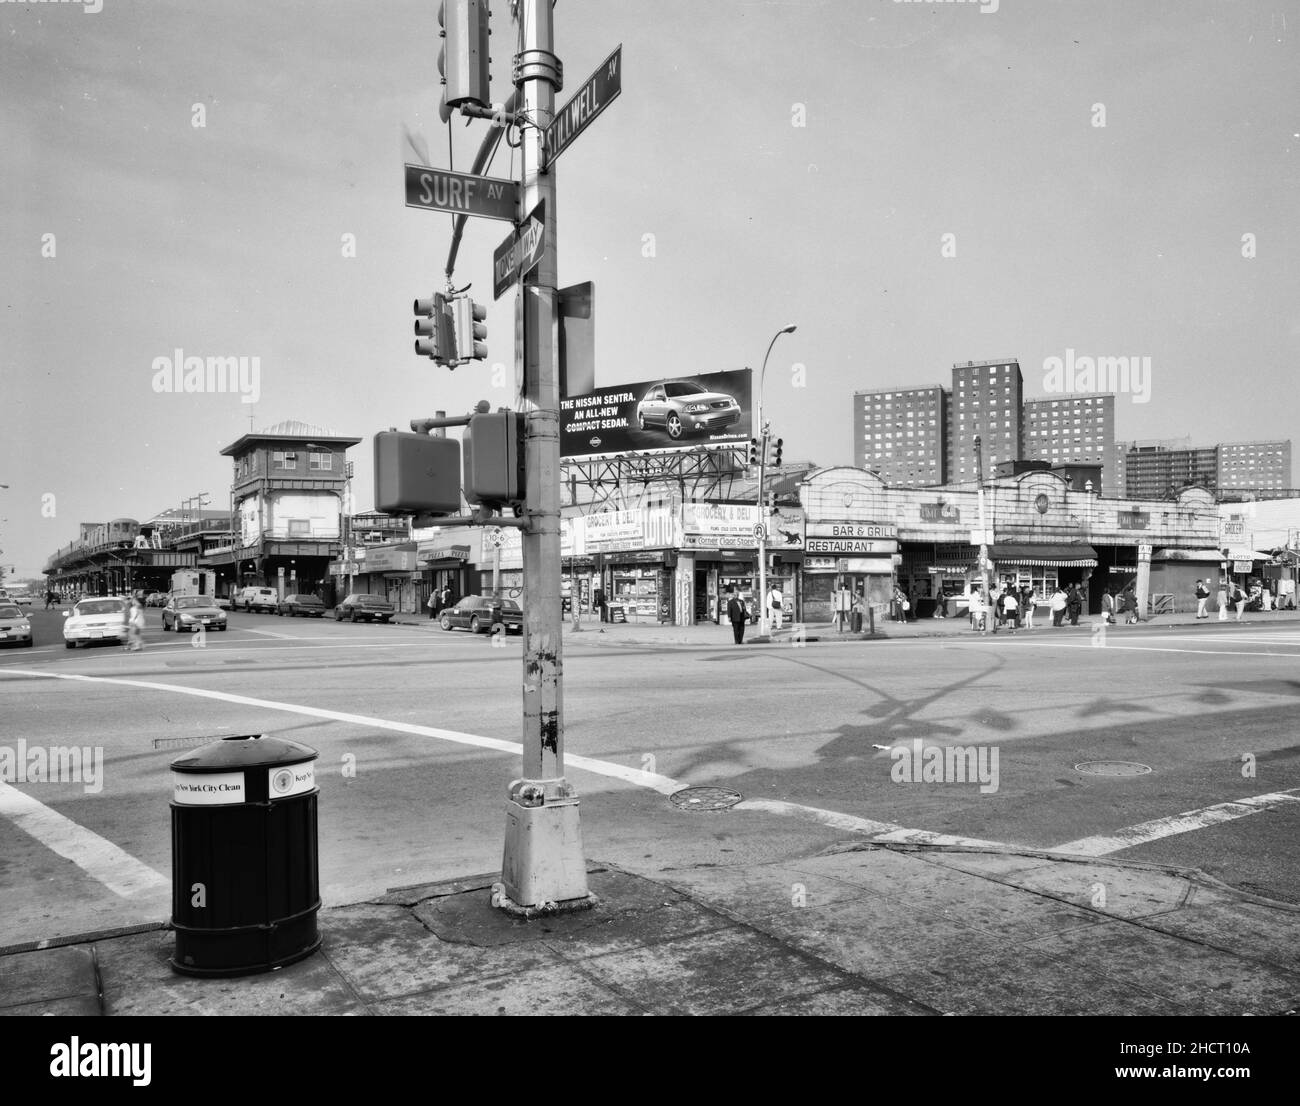 View of station in context, from the original Nathan's hotdog stand on the corner of Stillwell Avenue and Surf Avenue. Looking northeast. - Stillwell Avenue Station, Intersection of Stillwell & Surf Avenues, Brooklyn, Kings County, NY Stock Photo